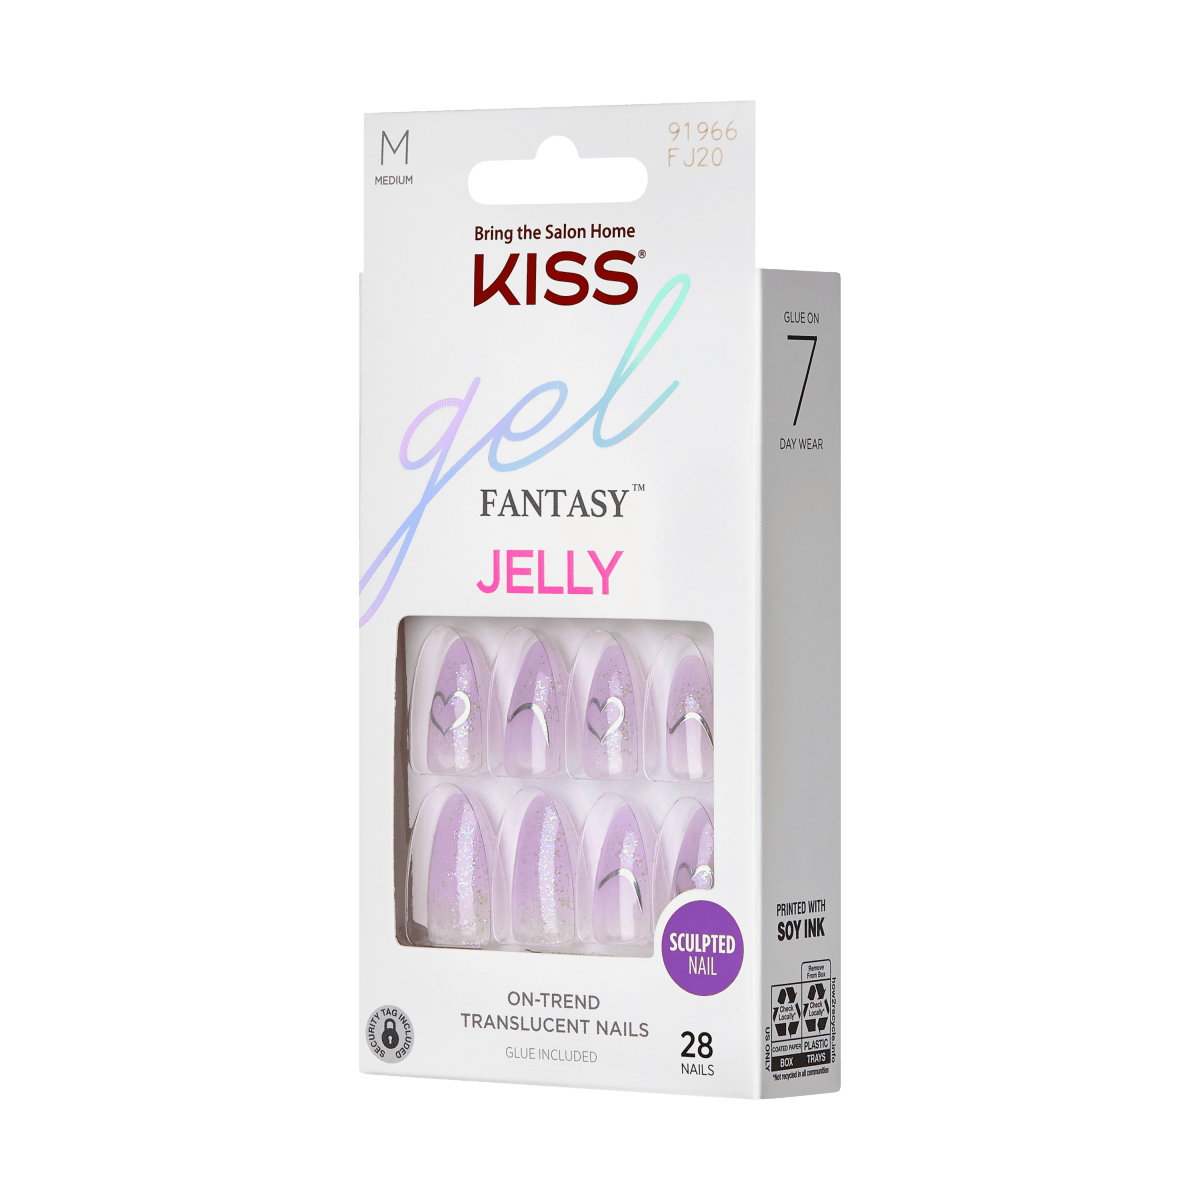 KISS Gel Fantasy Jelly Nails- One Day Jelly